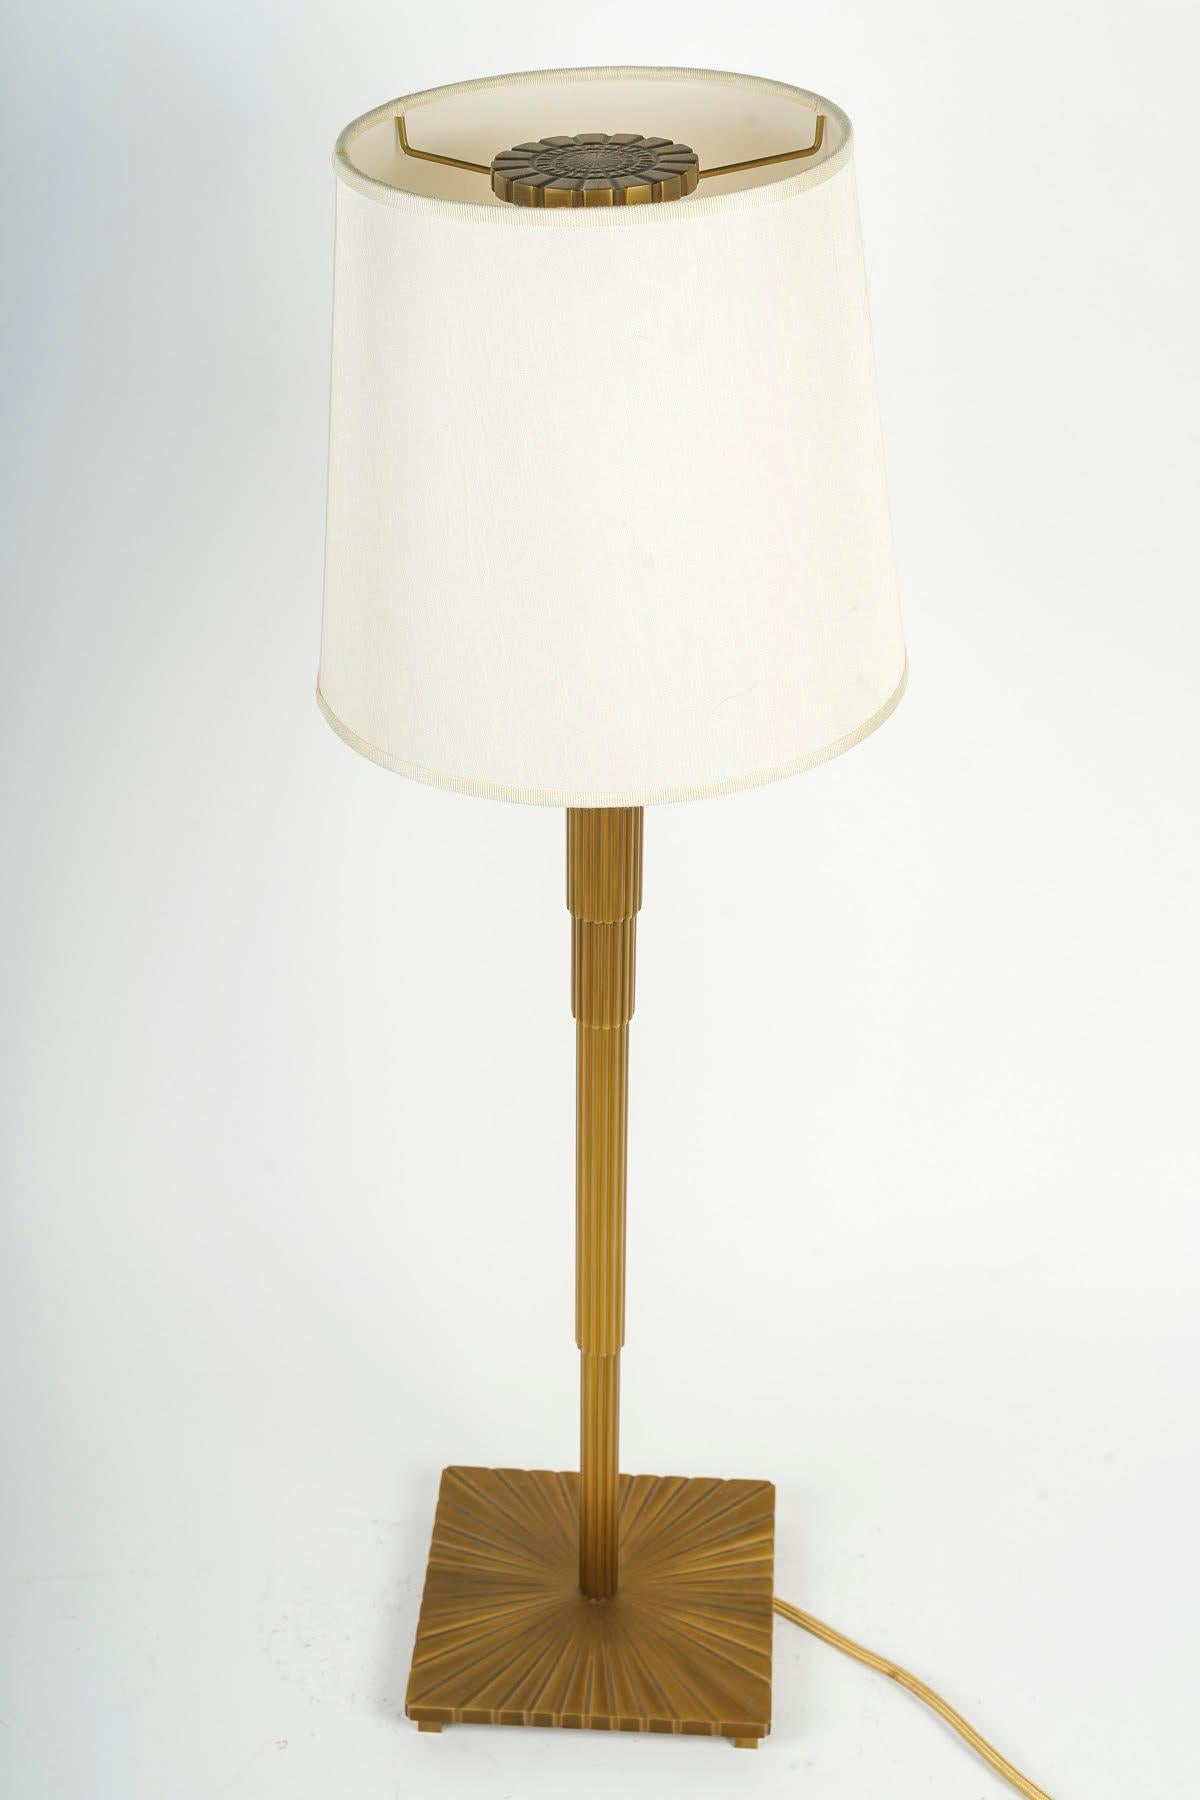 Gilt Bronze Table Lamps with Fluted Section and Square Base, Art Deco Style. For Sale 2